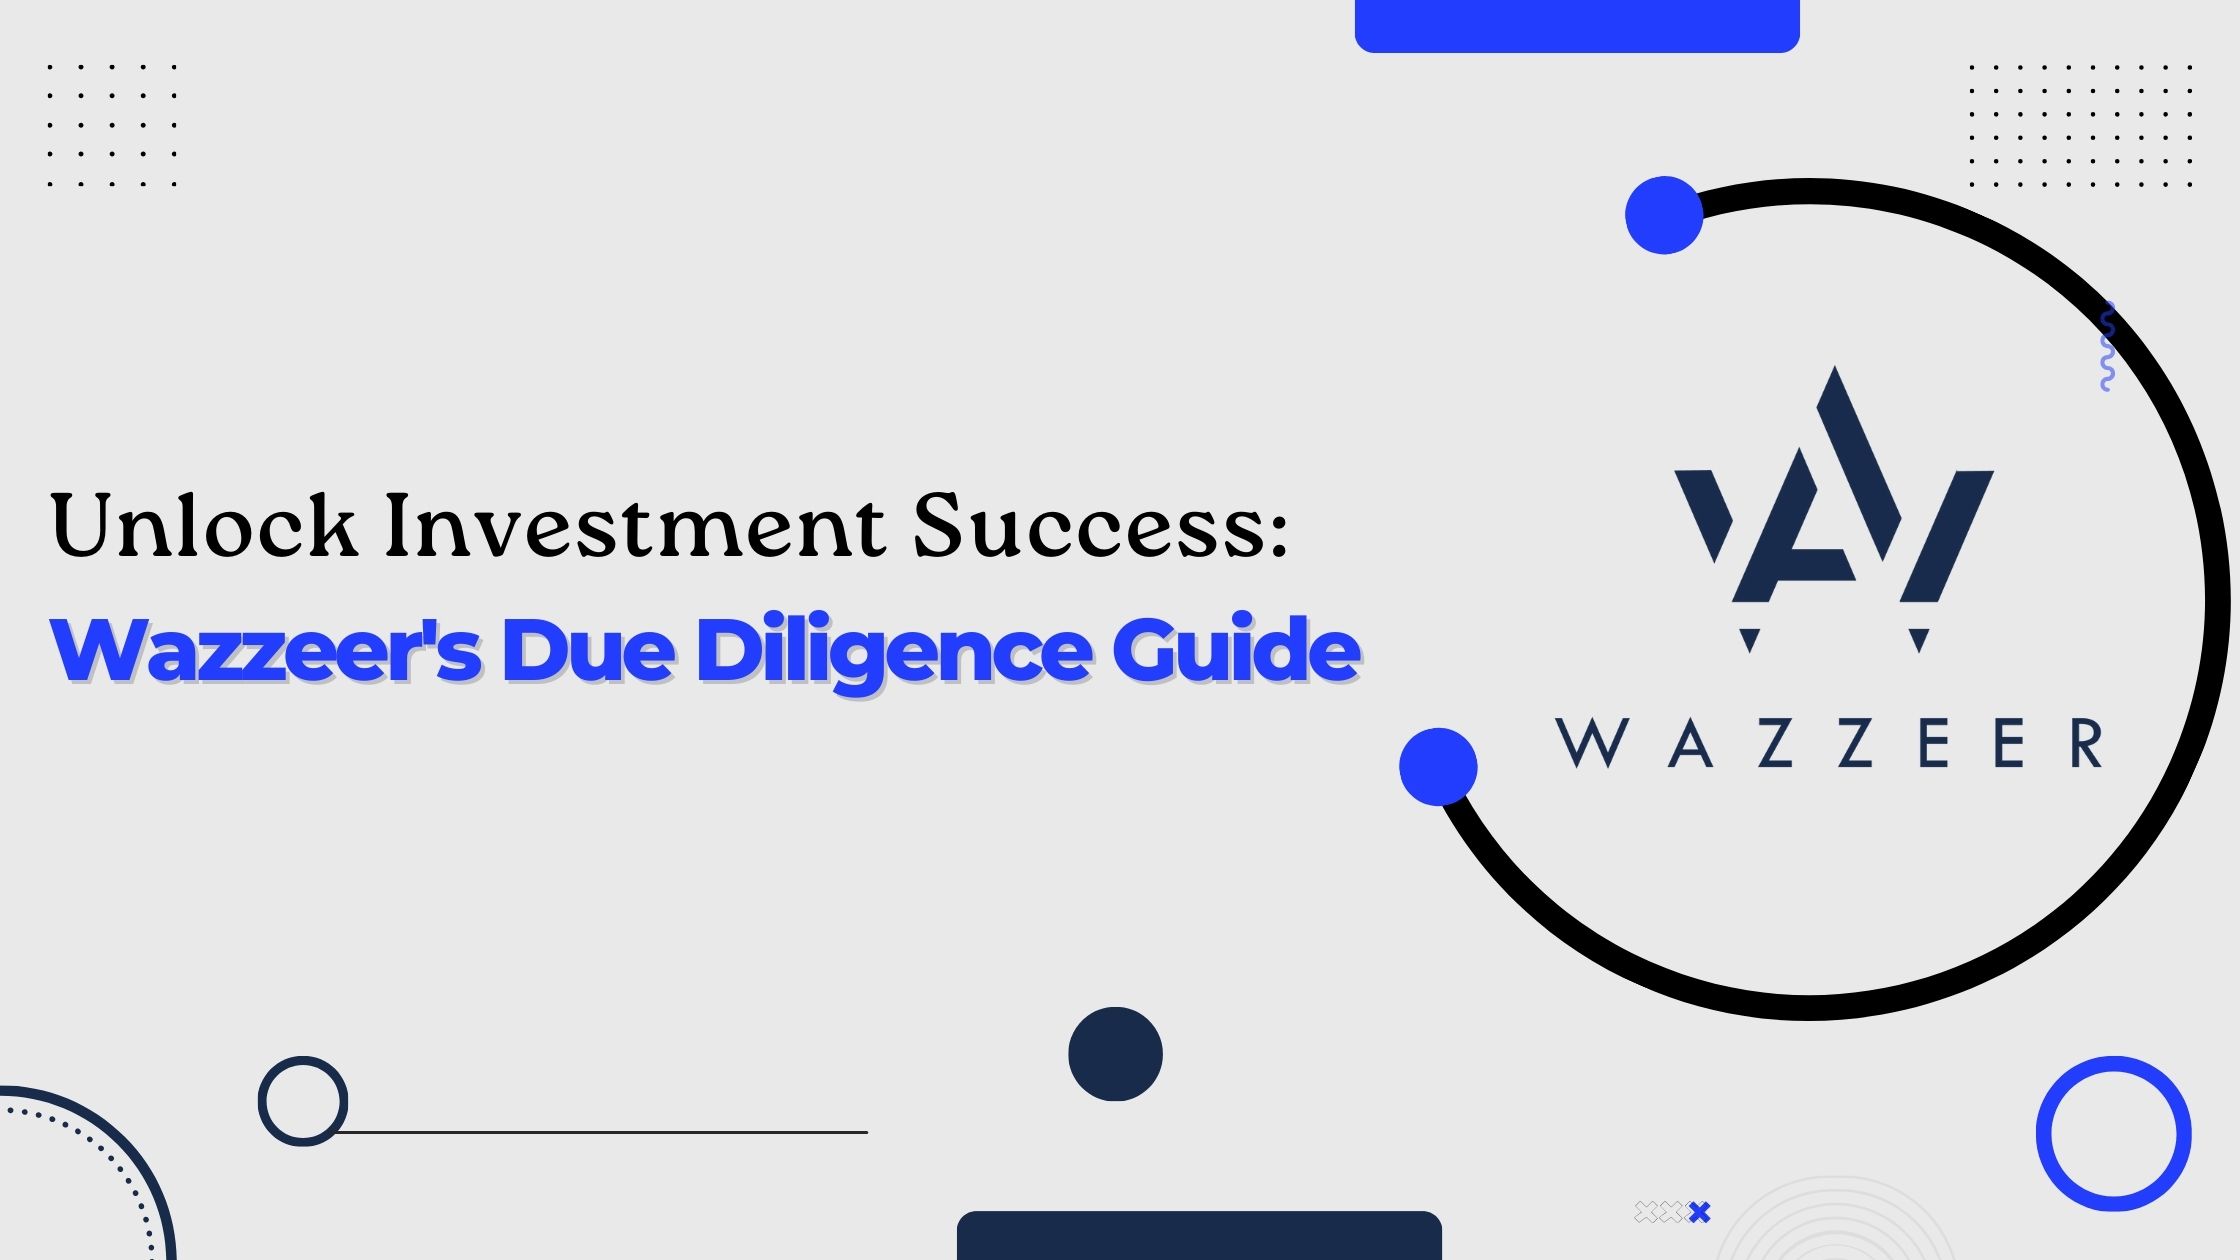 Unlock Investment Success: Wazzeer's Due Diligence Guide